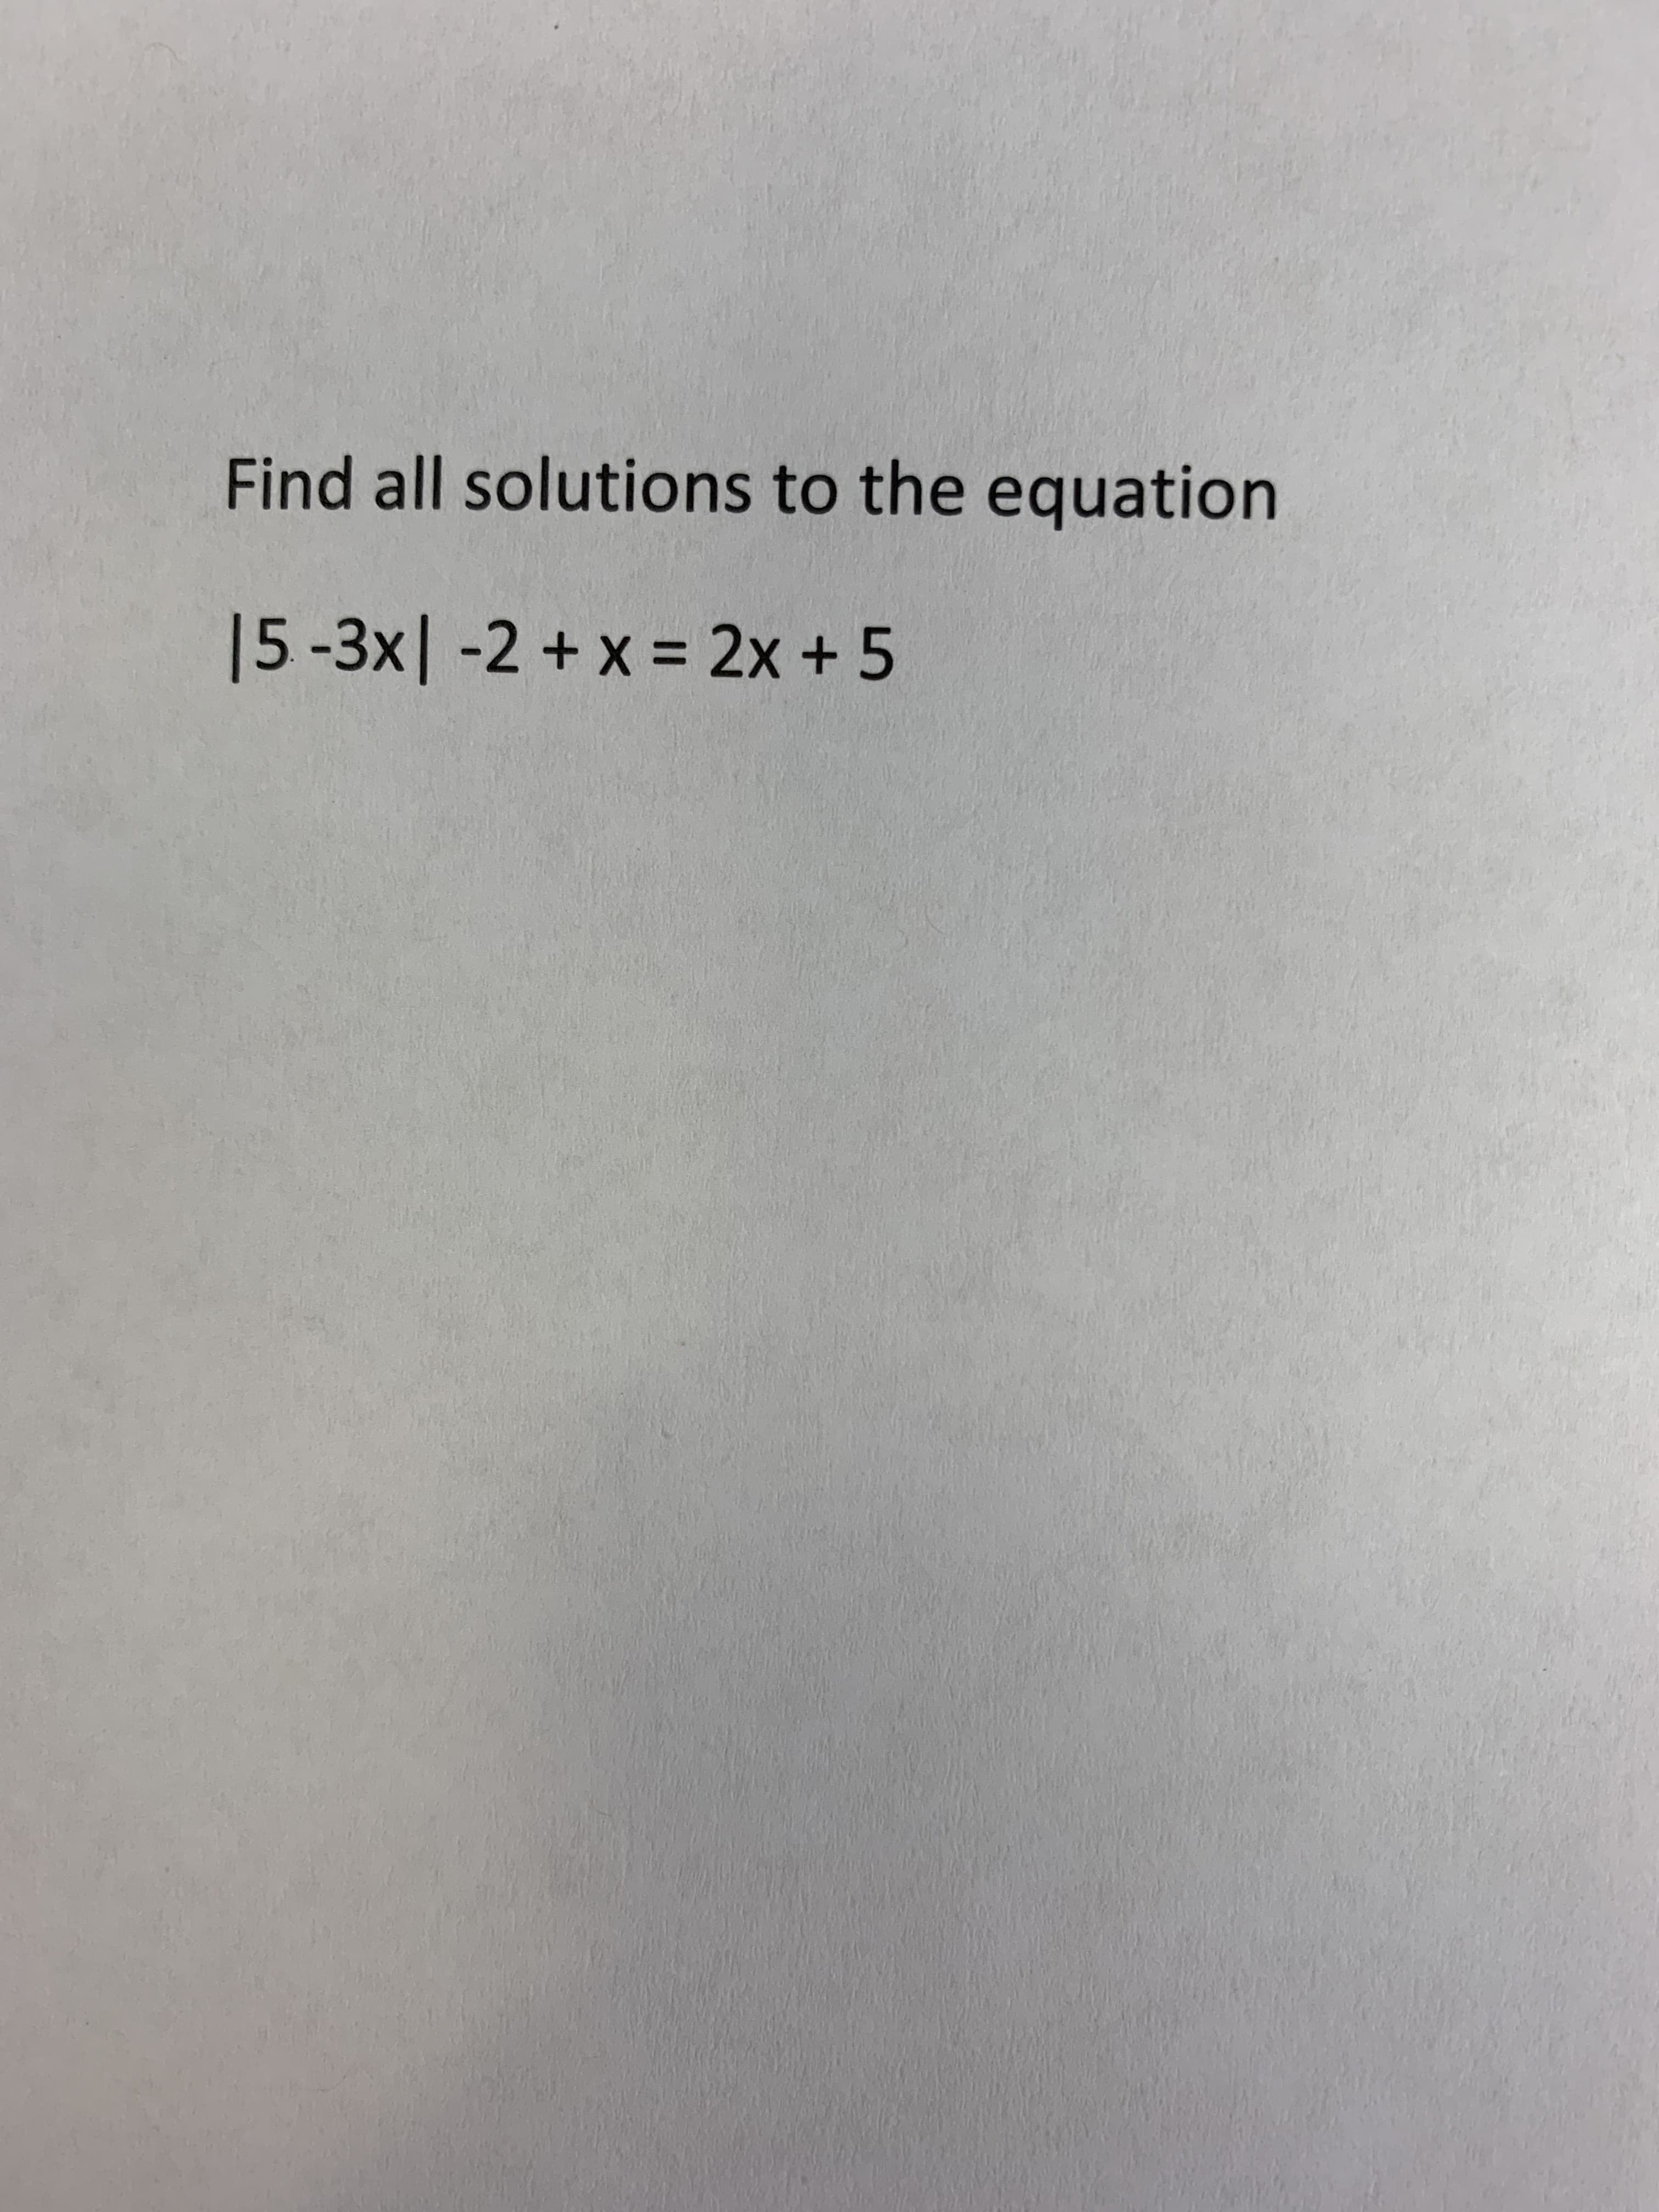 Find all solutions to the equation
15-3x| -2 + x = 2x + 5
